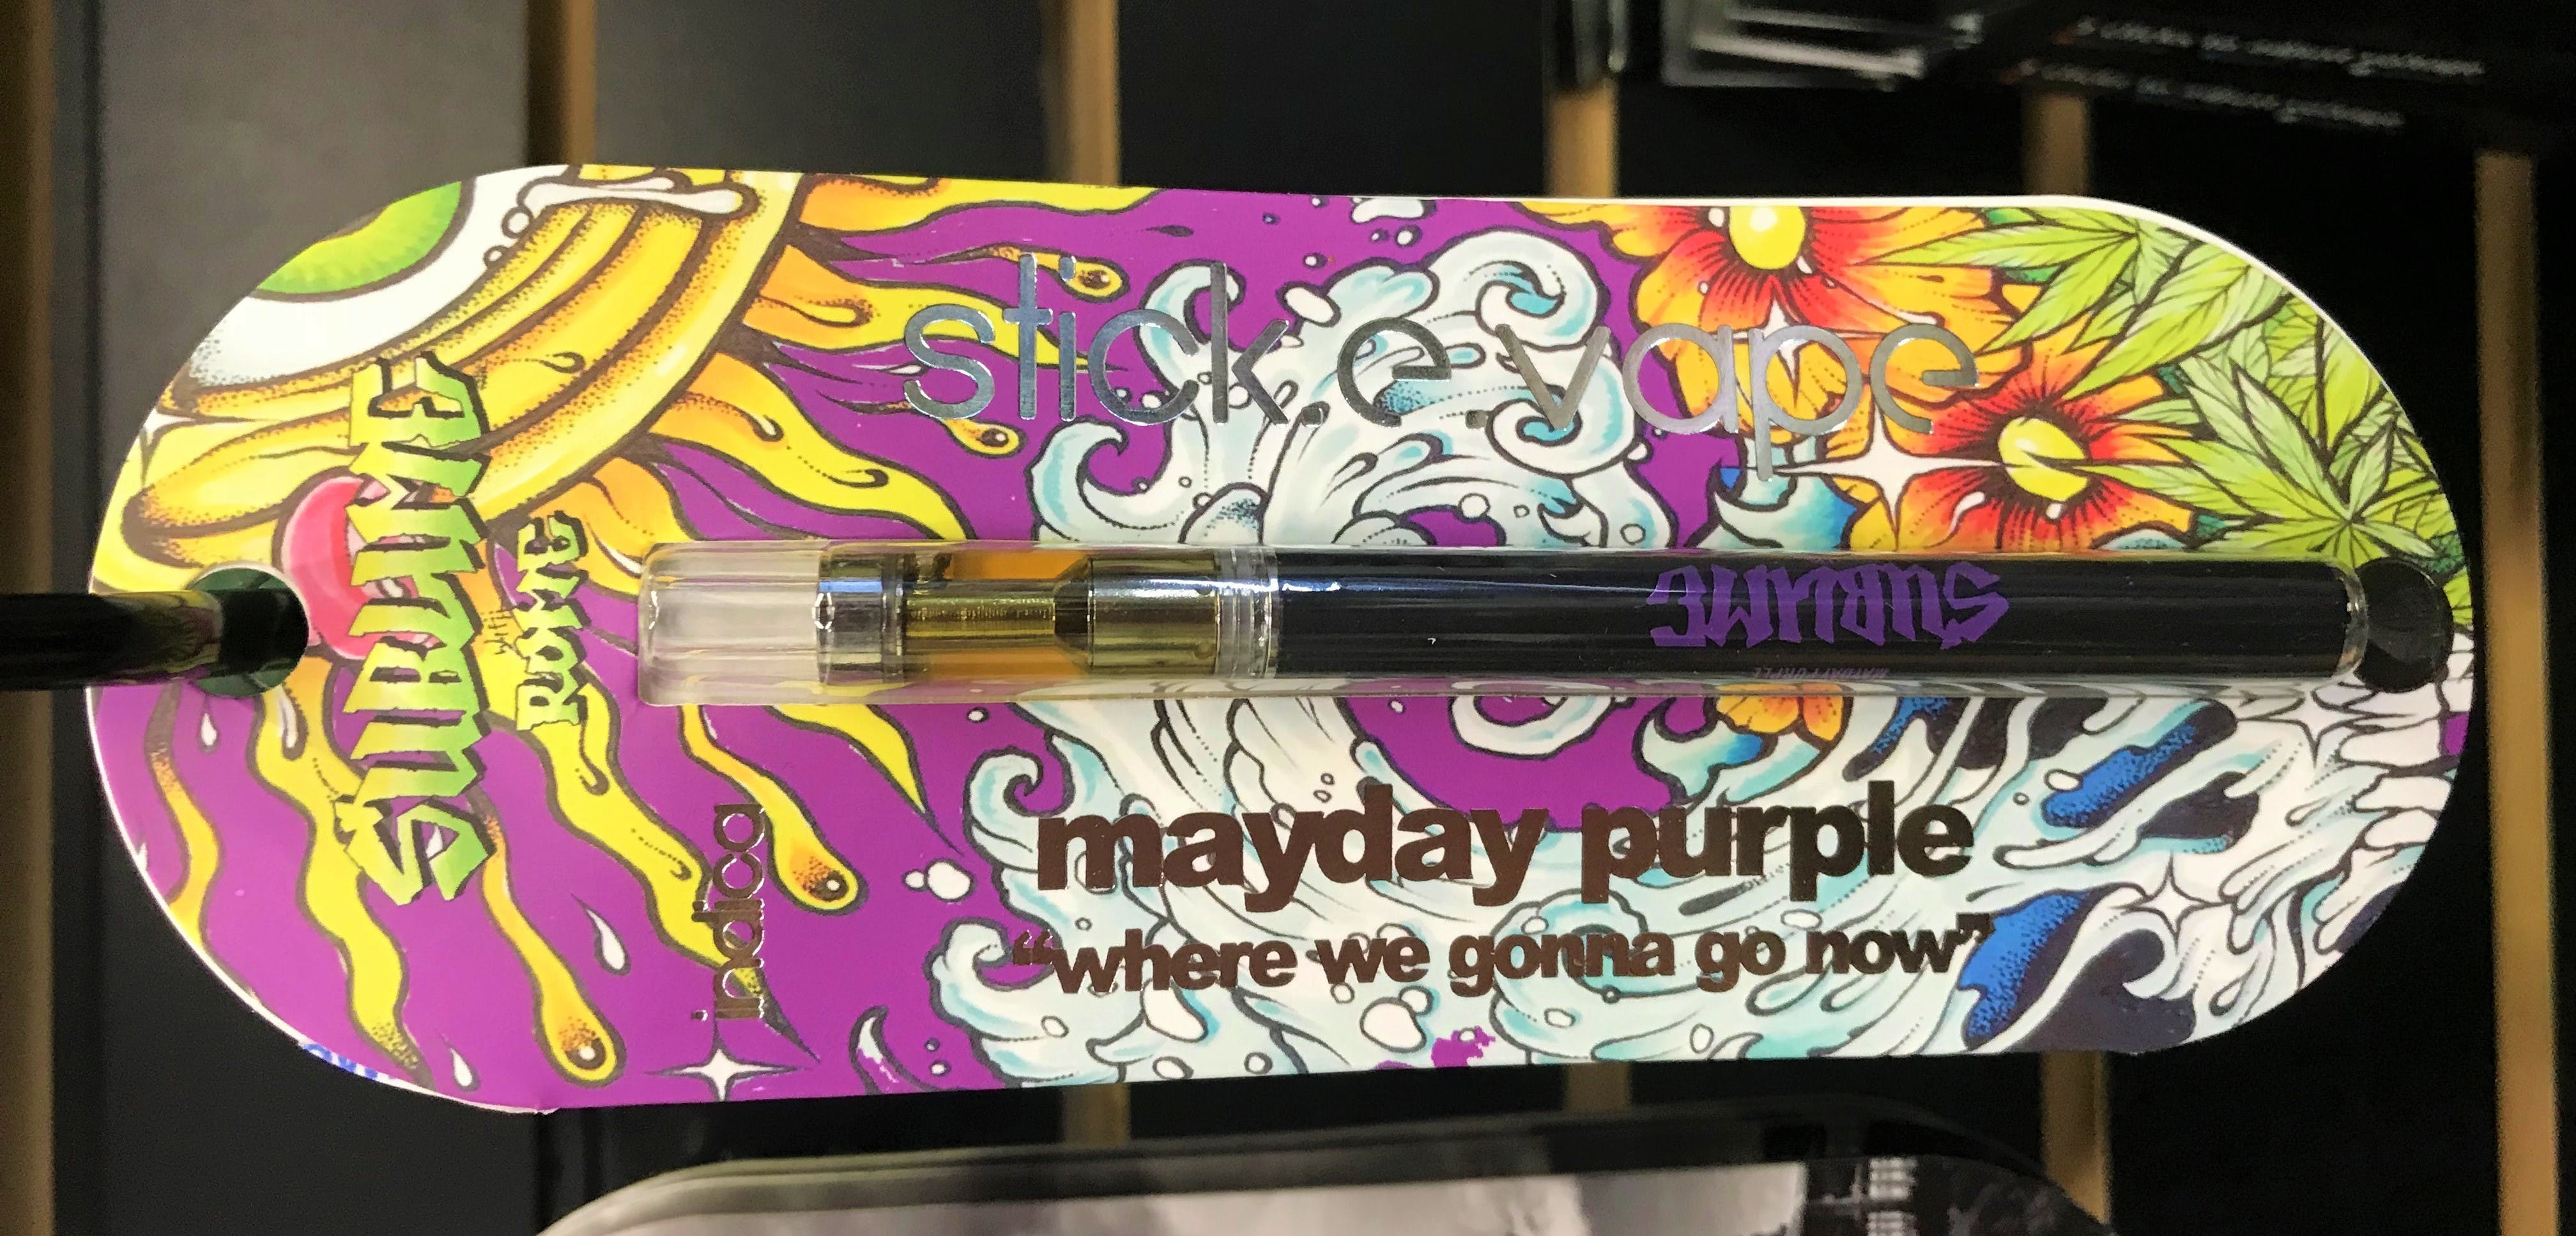 concentrate-stick-e-vape-sublime-mayday-purple-500mg-disposable